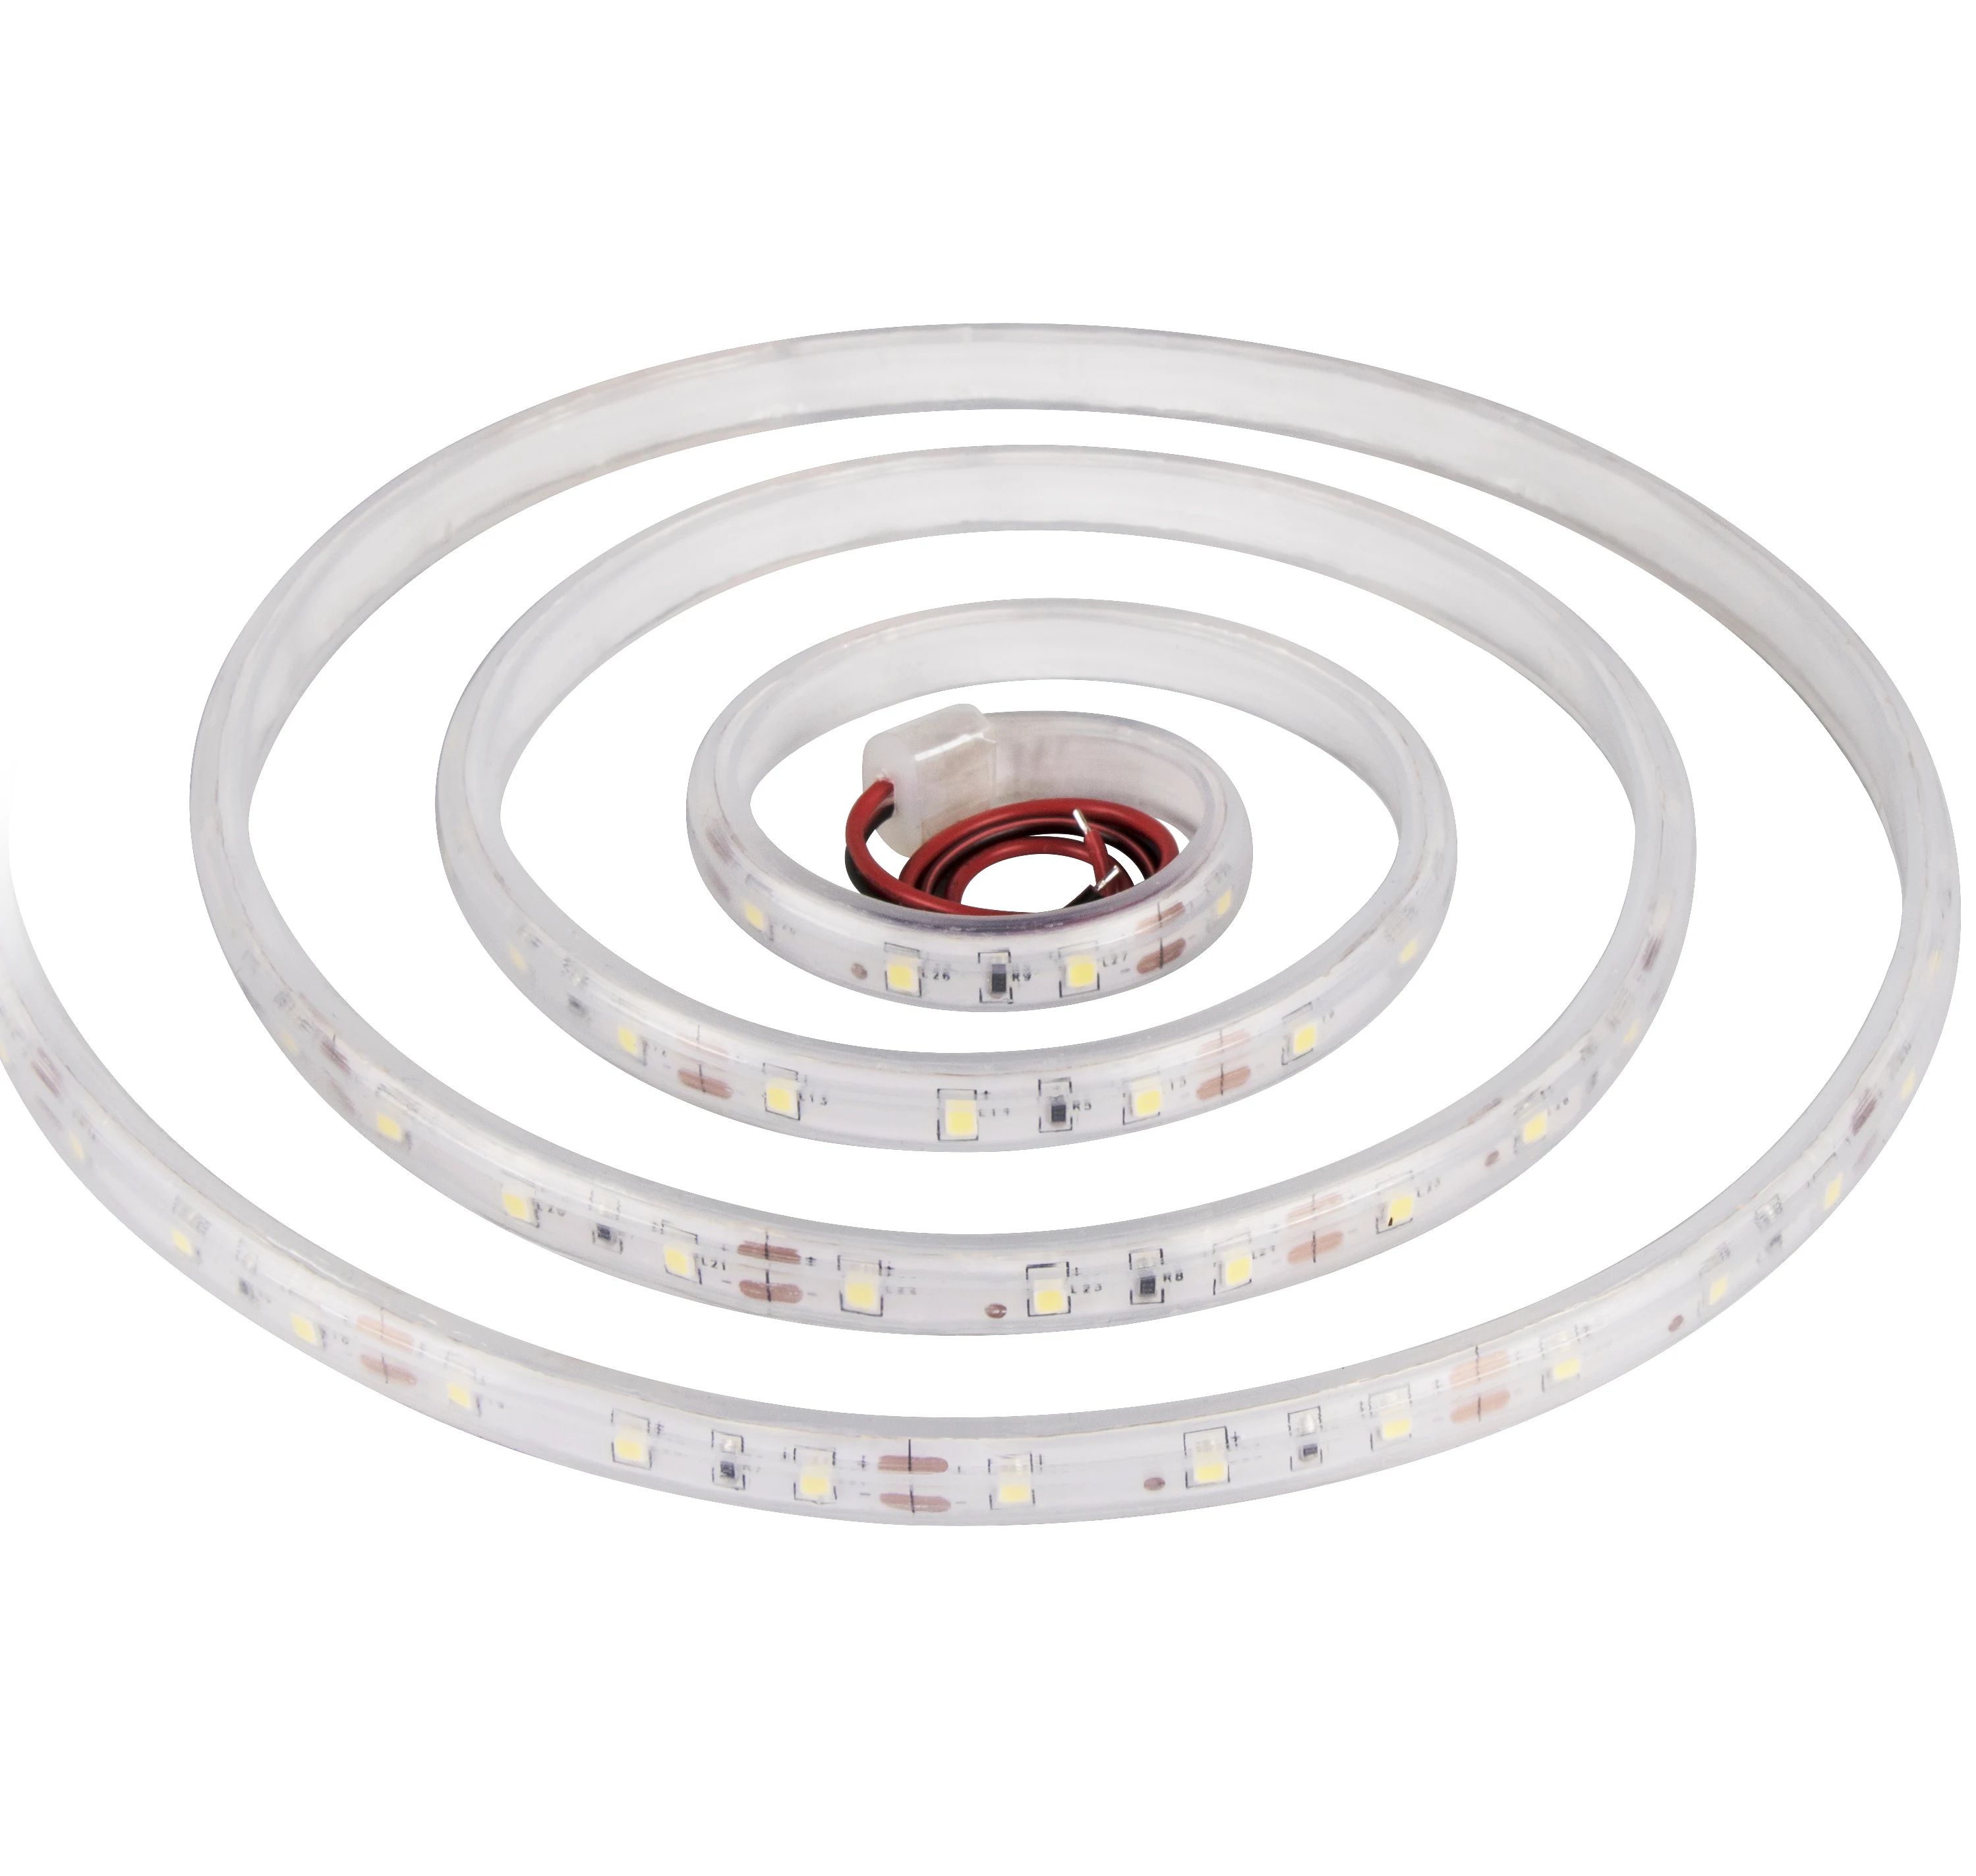 IP54 Silicone Glue LED Strip Light retail pack project business